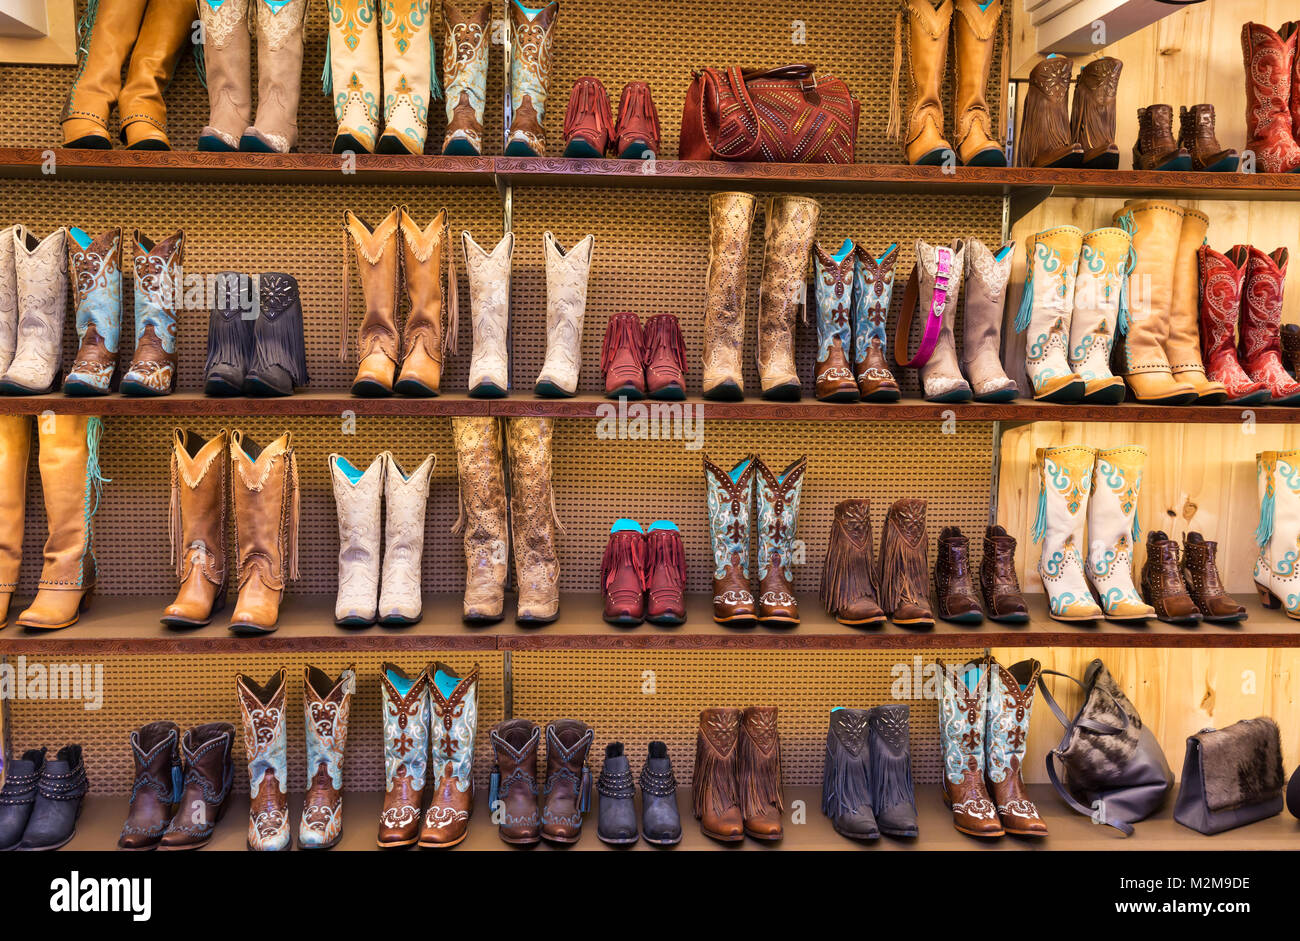 Cowboy boots on a shelf in a store, front view Stock Photo